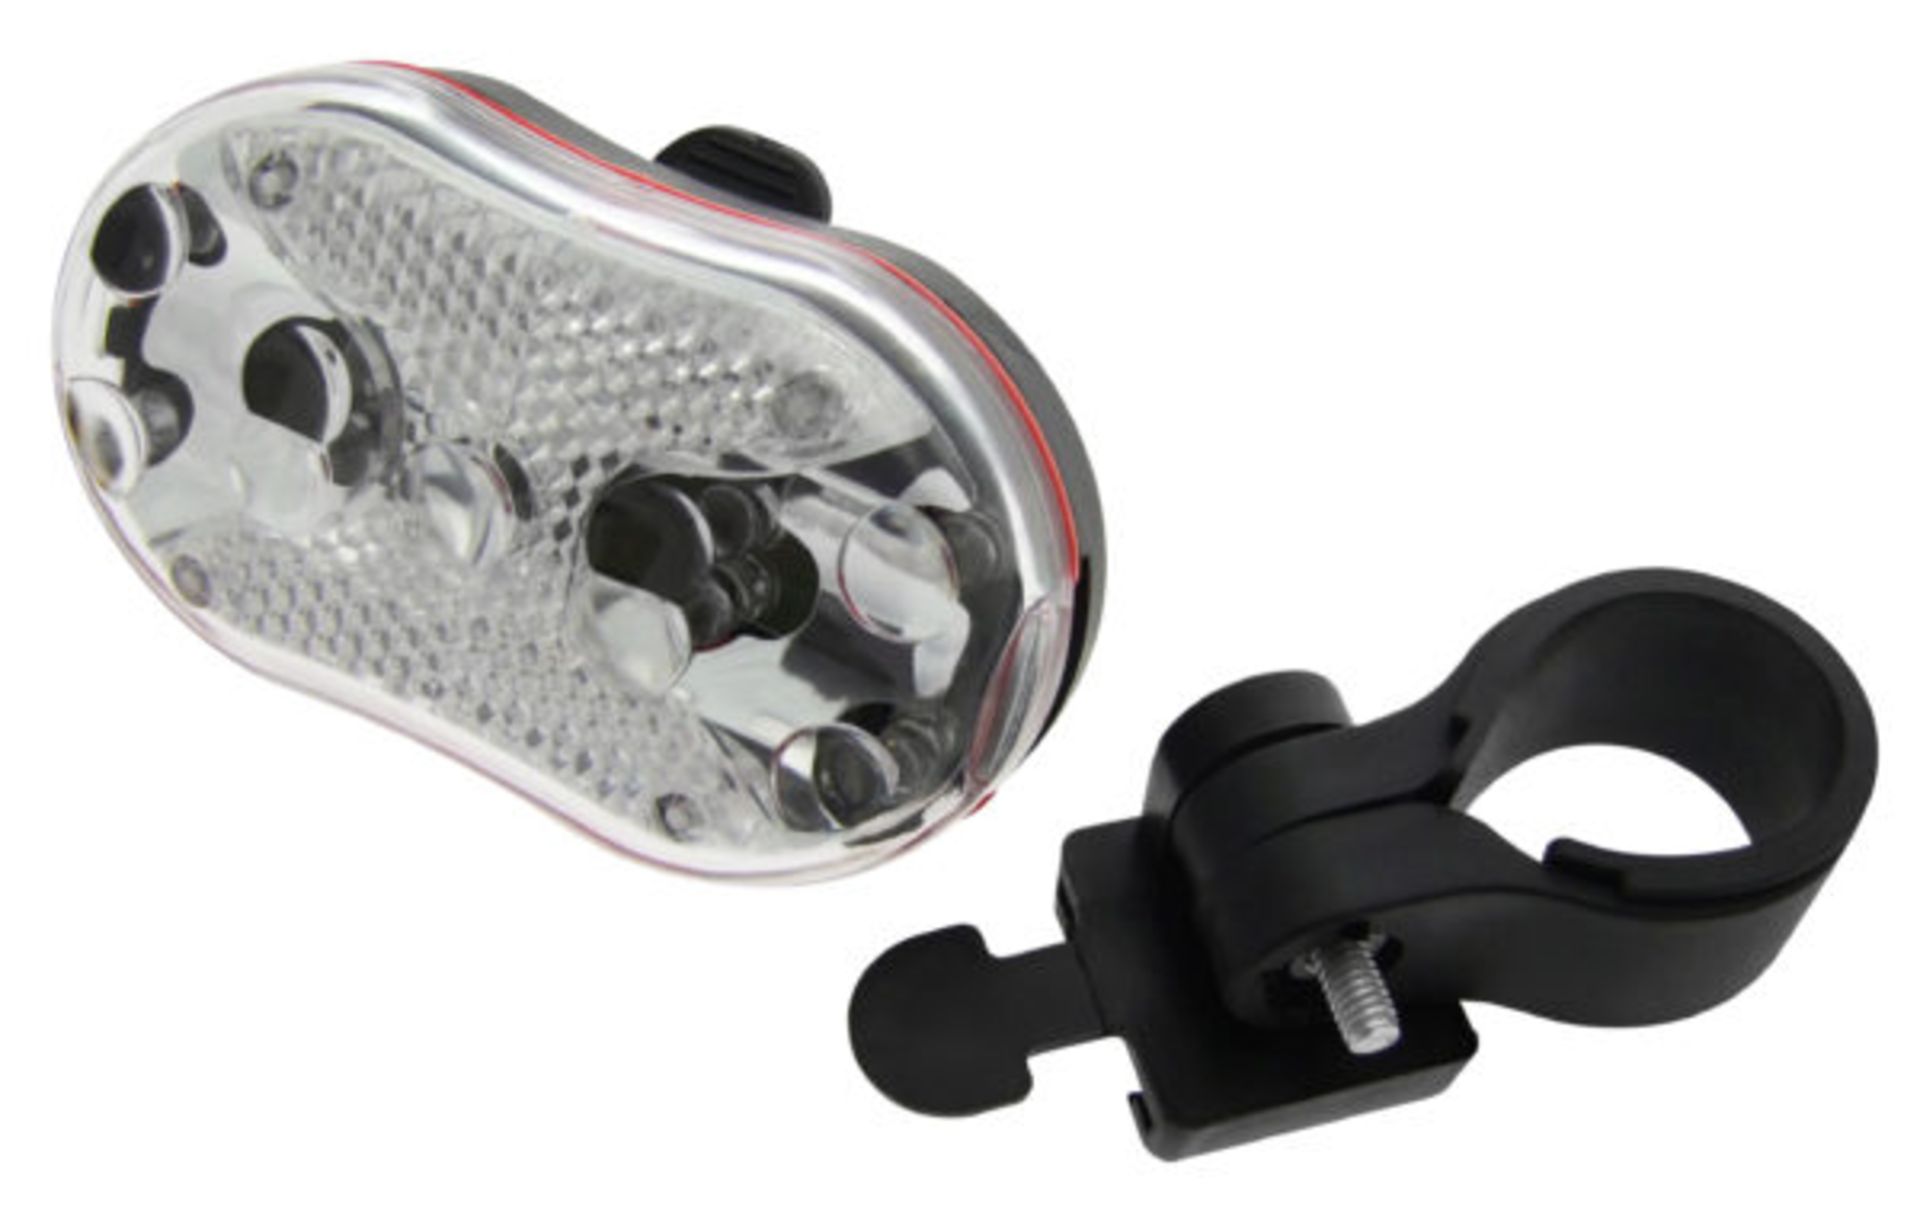 V *TRADE QTY* Brand New 9 LED Front Bicycle Light - 7 Modes - Belt Clip - Mounting Bracket X 5